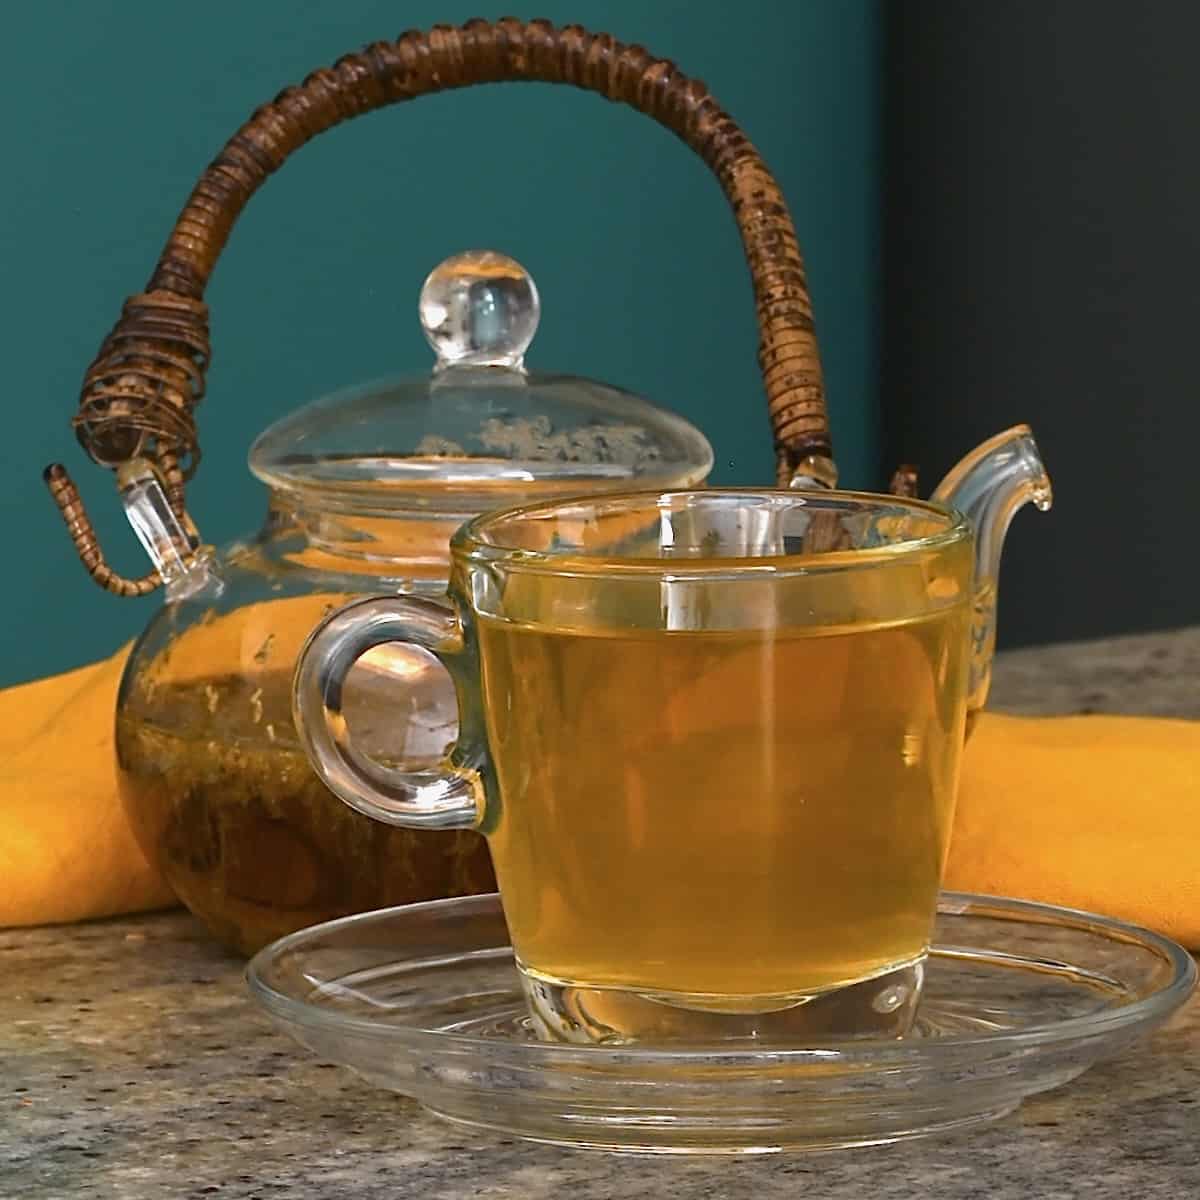 What Is a Tea Infusion?